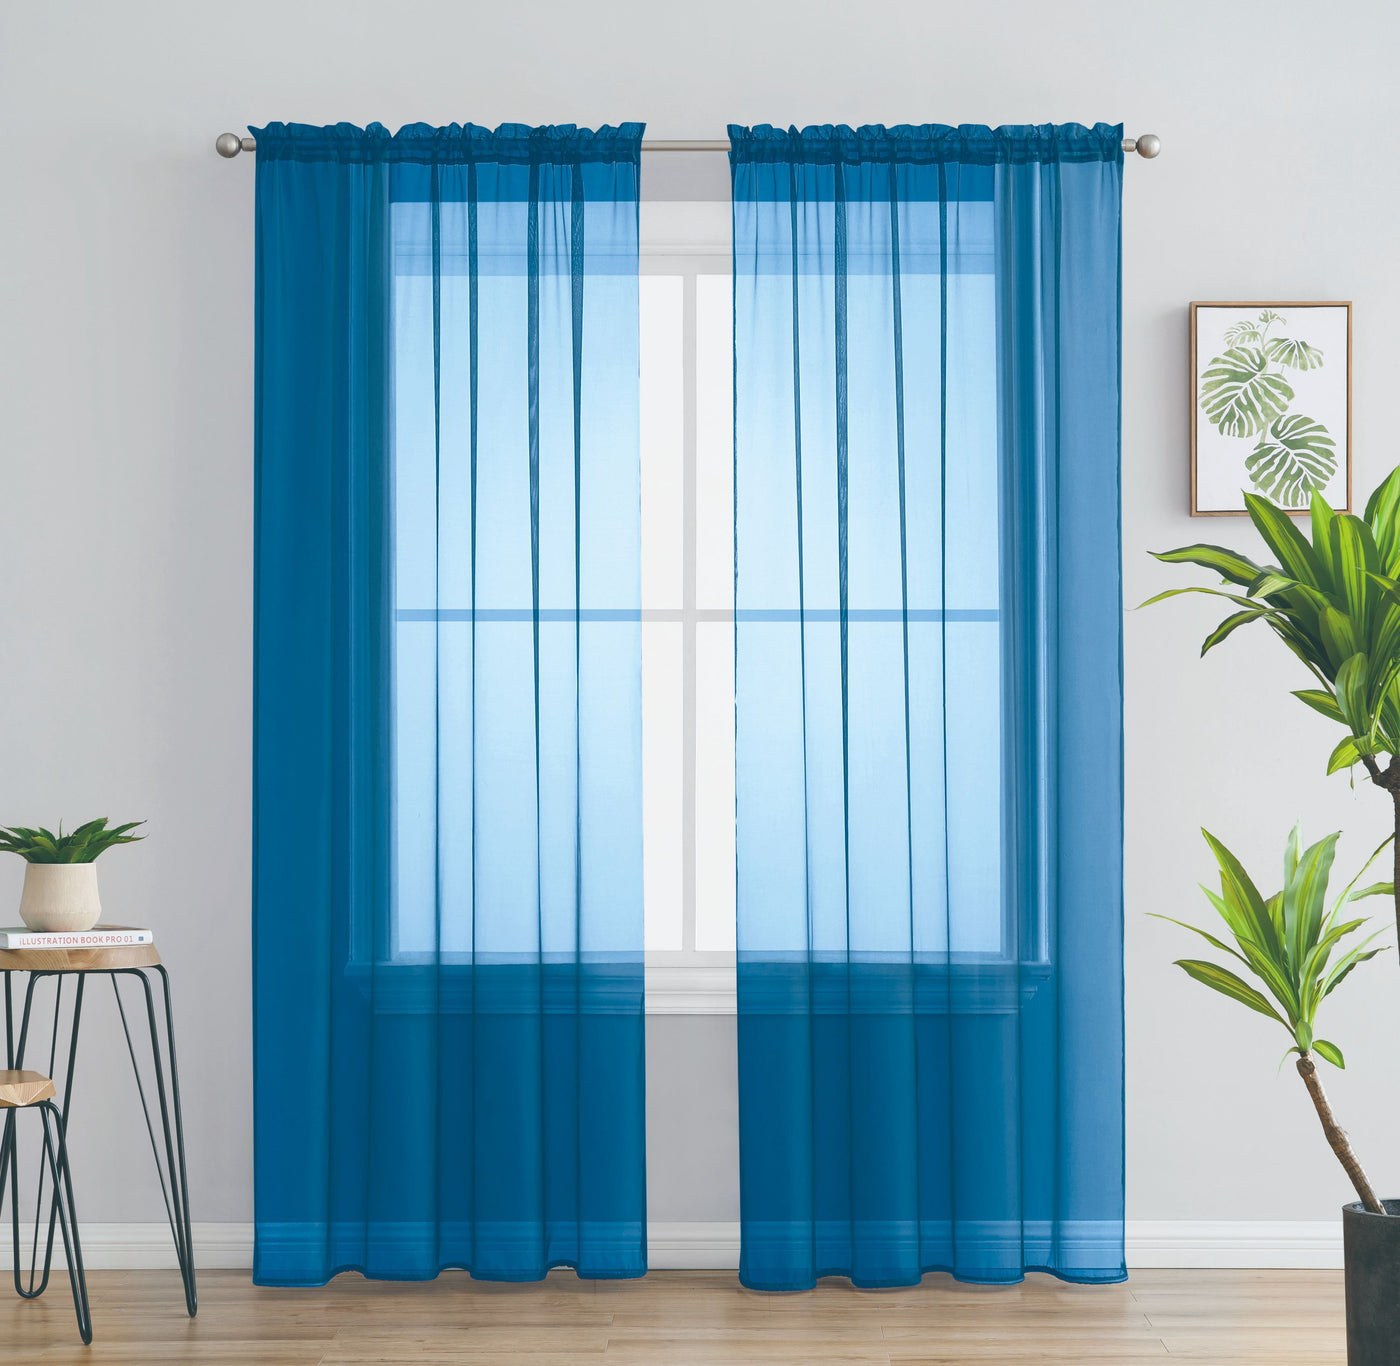 Solid Voile Rod Pocket Sheer Curtains for Bedroom Drapes Set of 2 90" Curtains for Bedroom Panels Window Treatment Home Decor 90" - Jenin-Home-Furnishing.CURTAINS